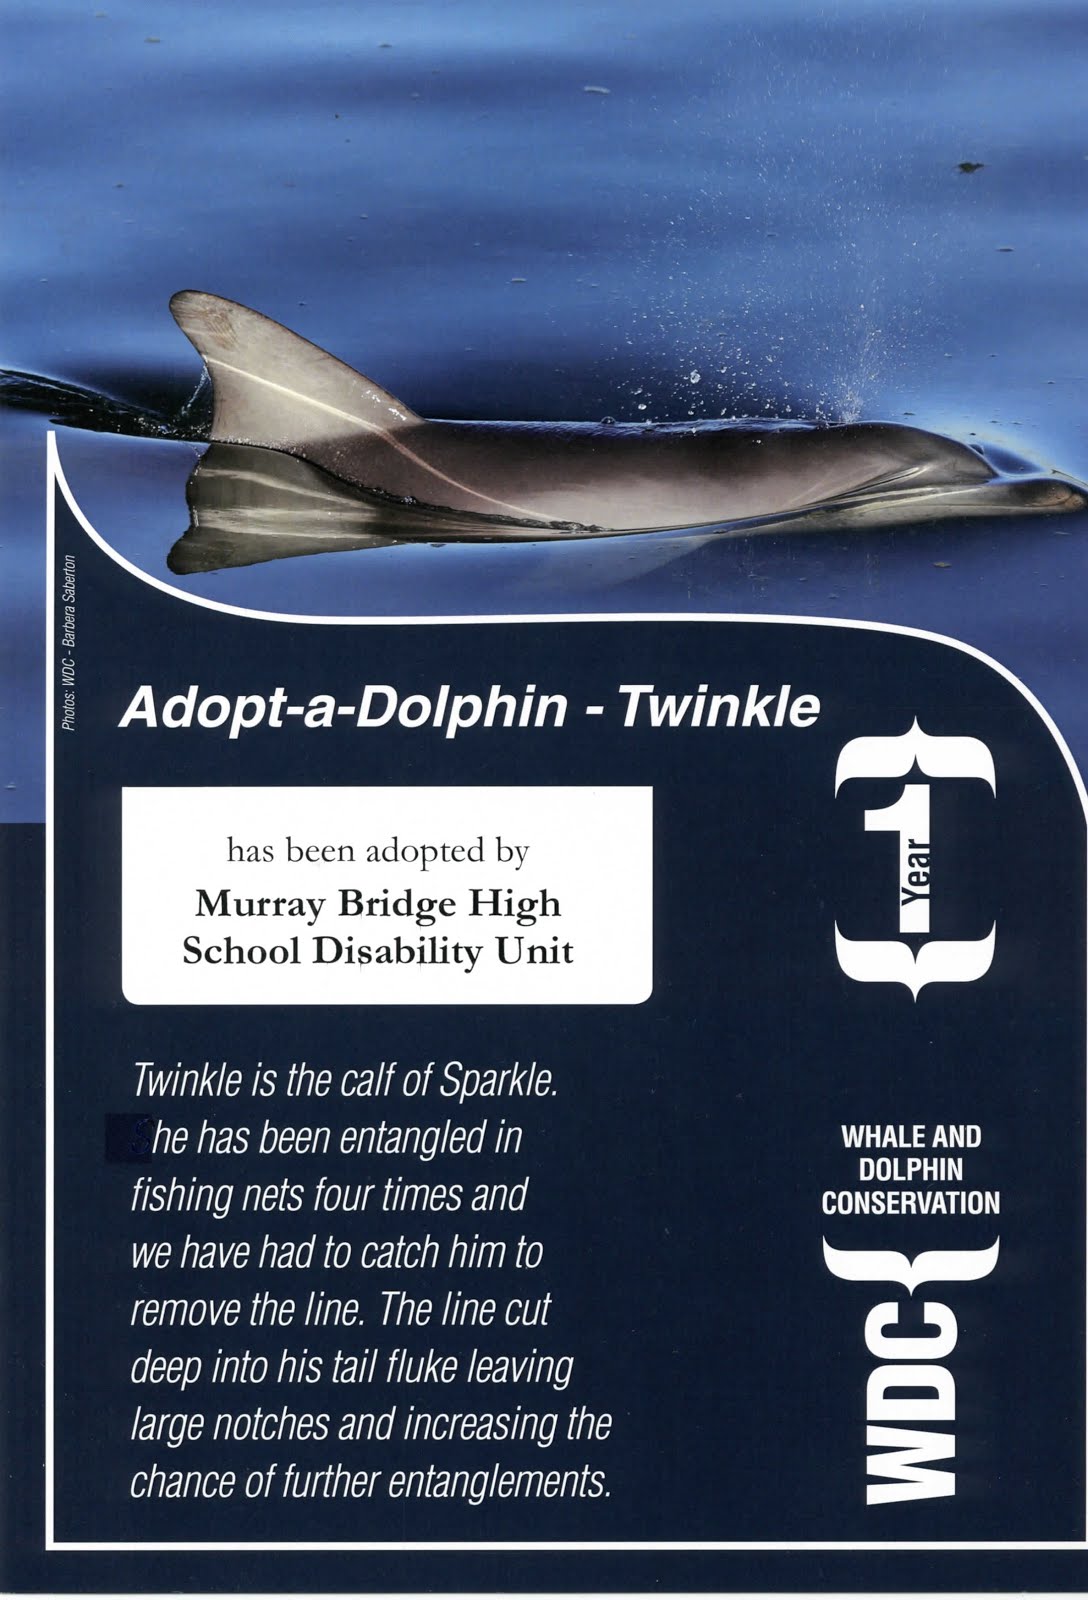 Our adopted dolphin